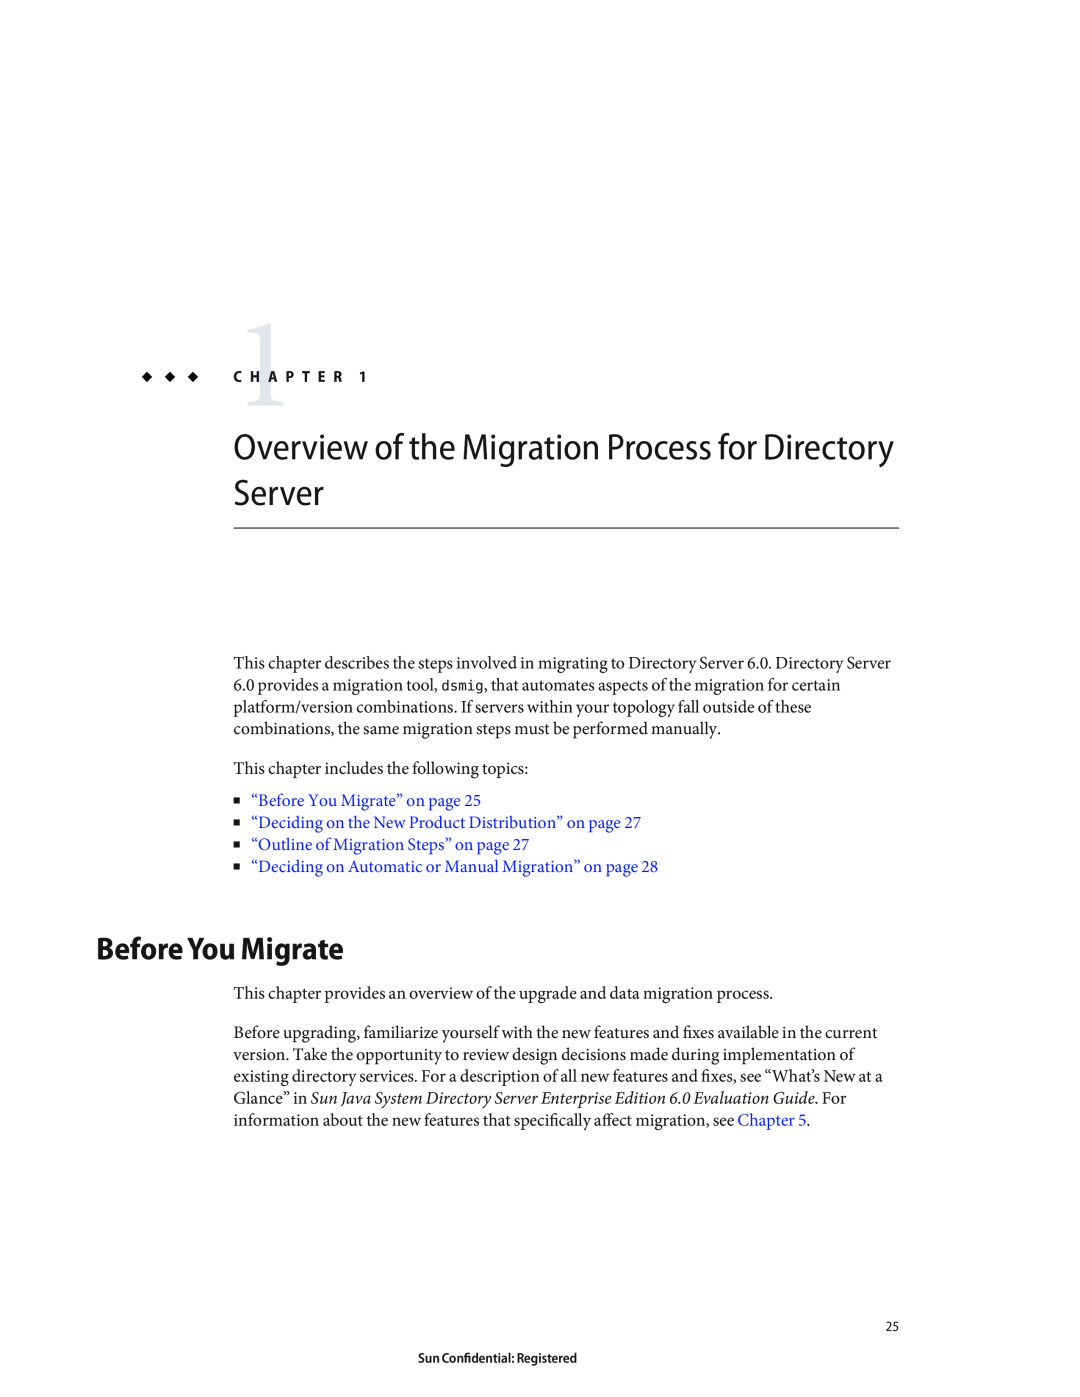 Sun Microsystems 8190994 manual Overview of the Migration Process for Directory Server, Before You Migrate 